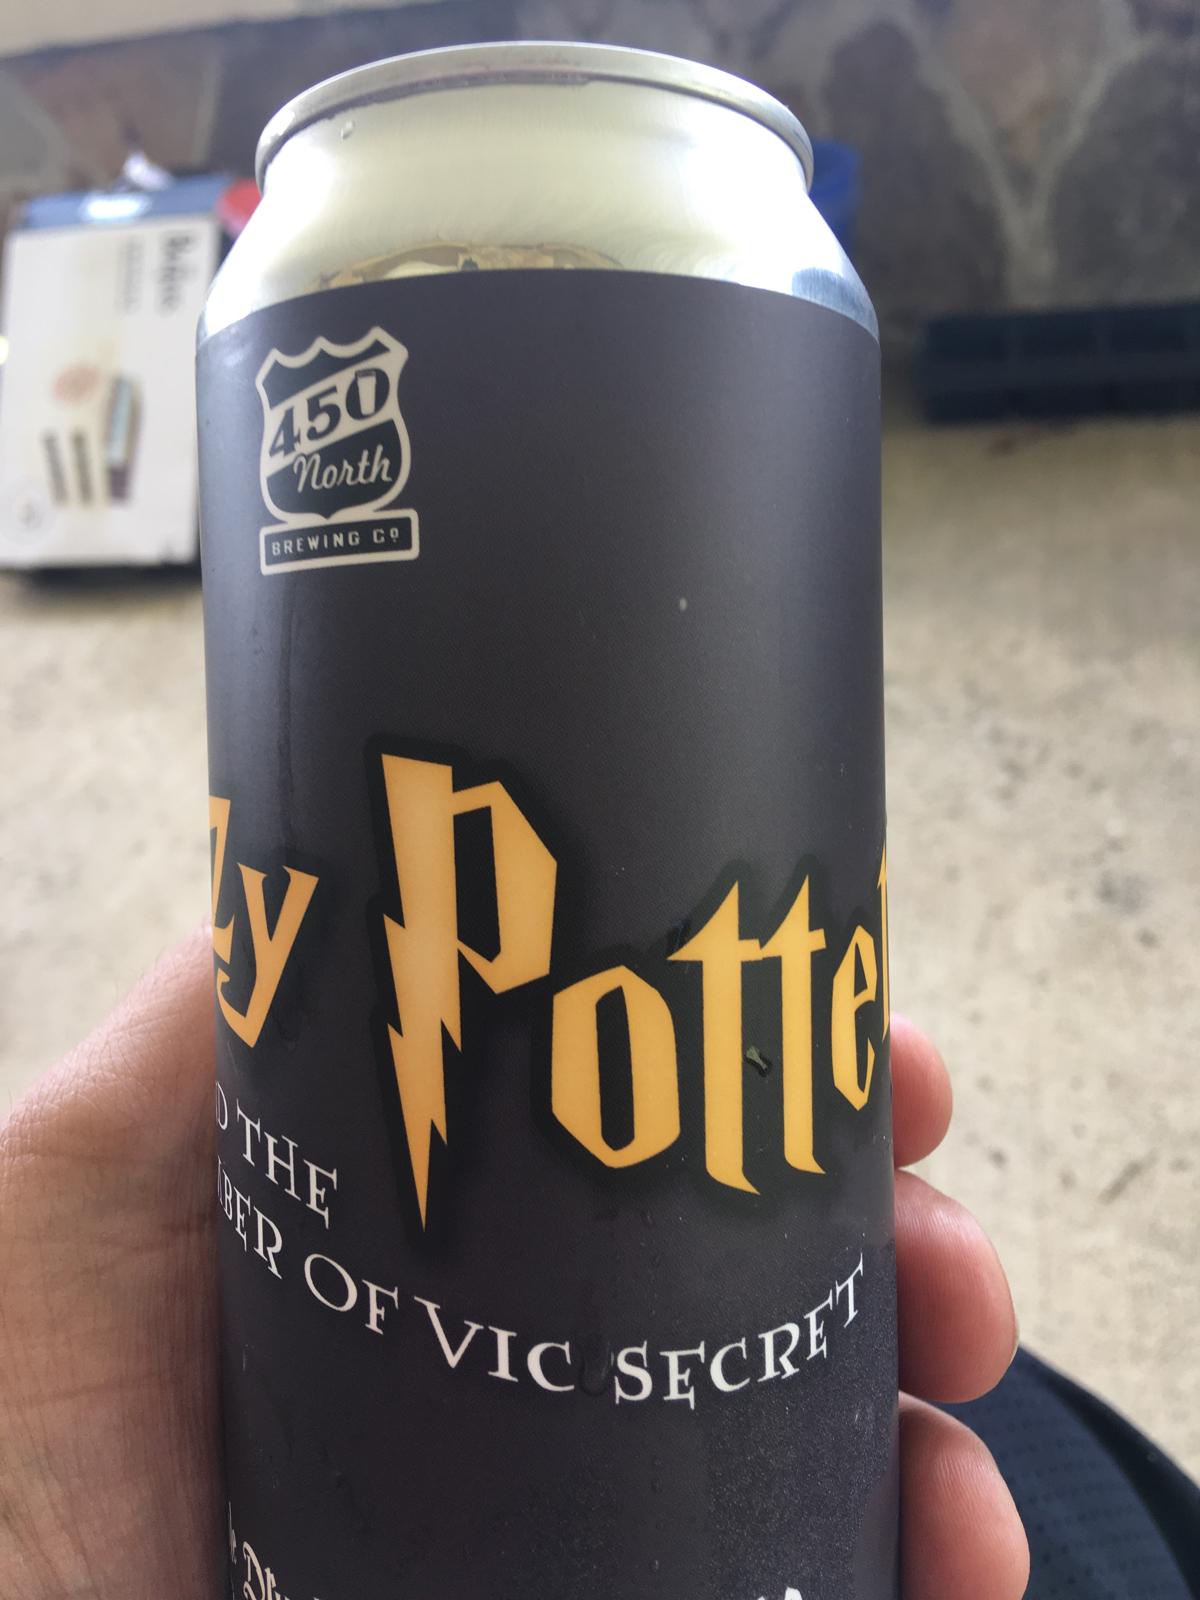 Hazy Potter And The Chamber Of Vic Secret